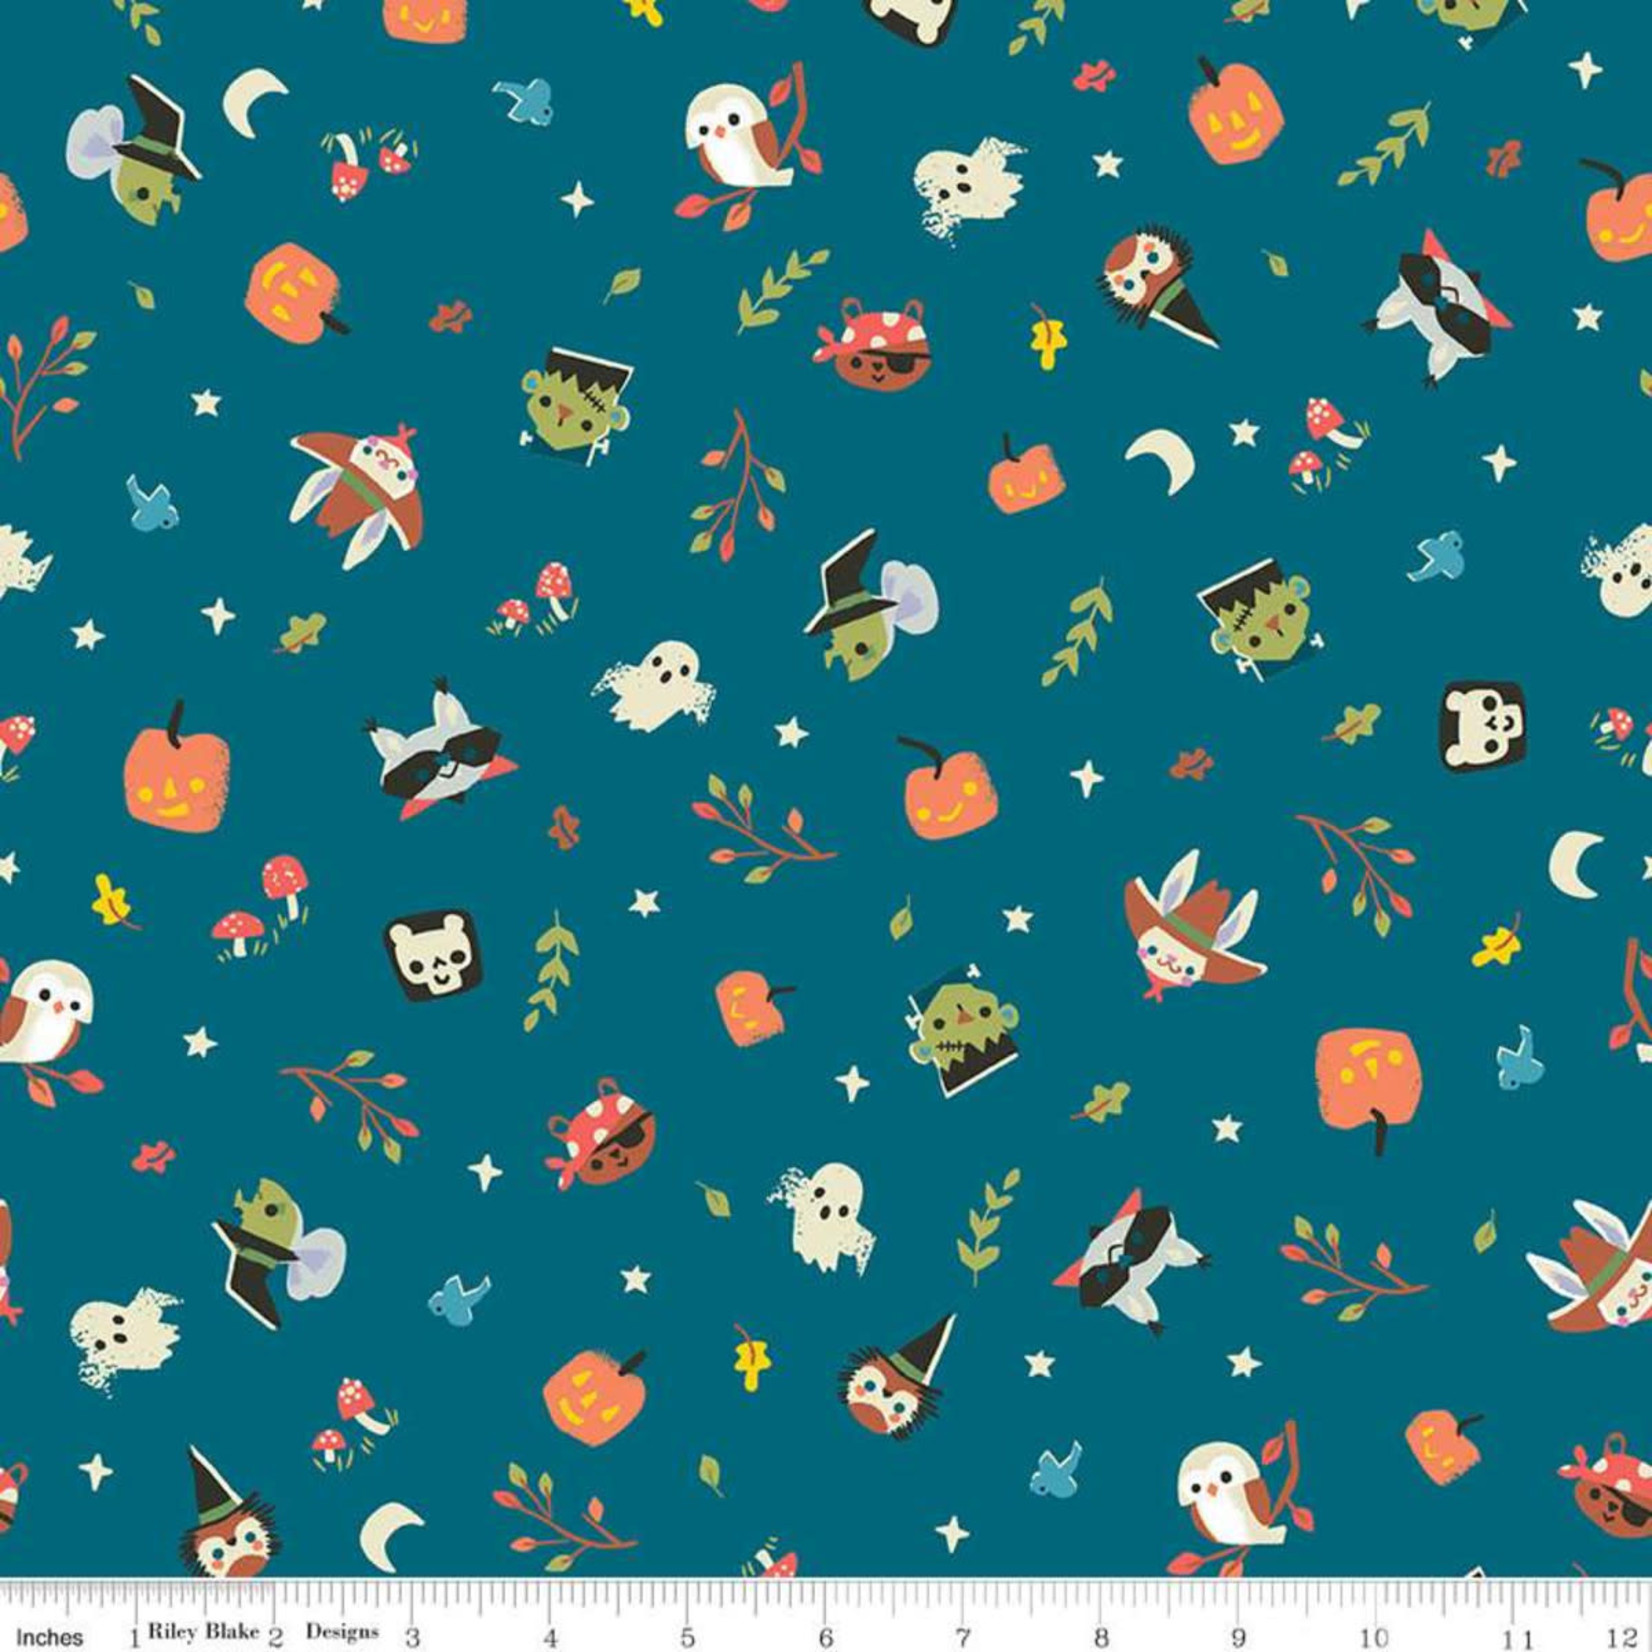 Riley Blake Designs Tiny Treaters, Toss, Teal (GC10481-TEAL) $0.20 per cm or $20/m